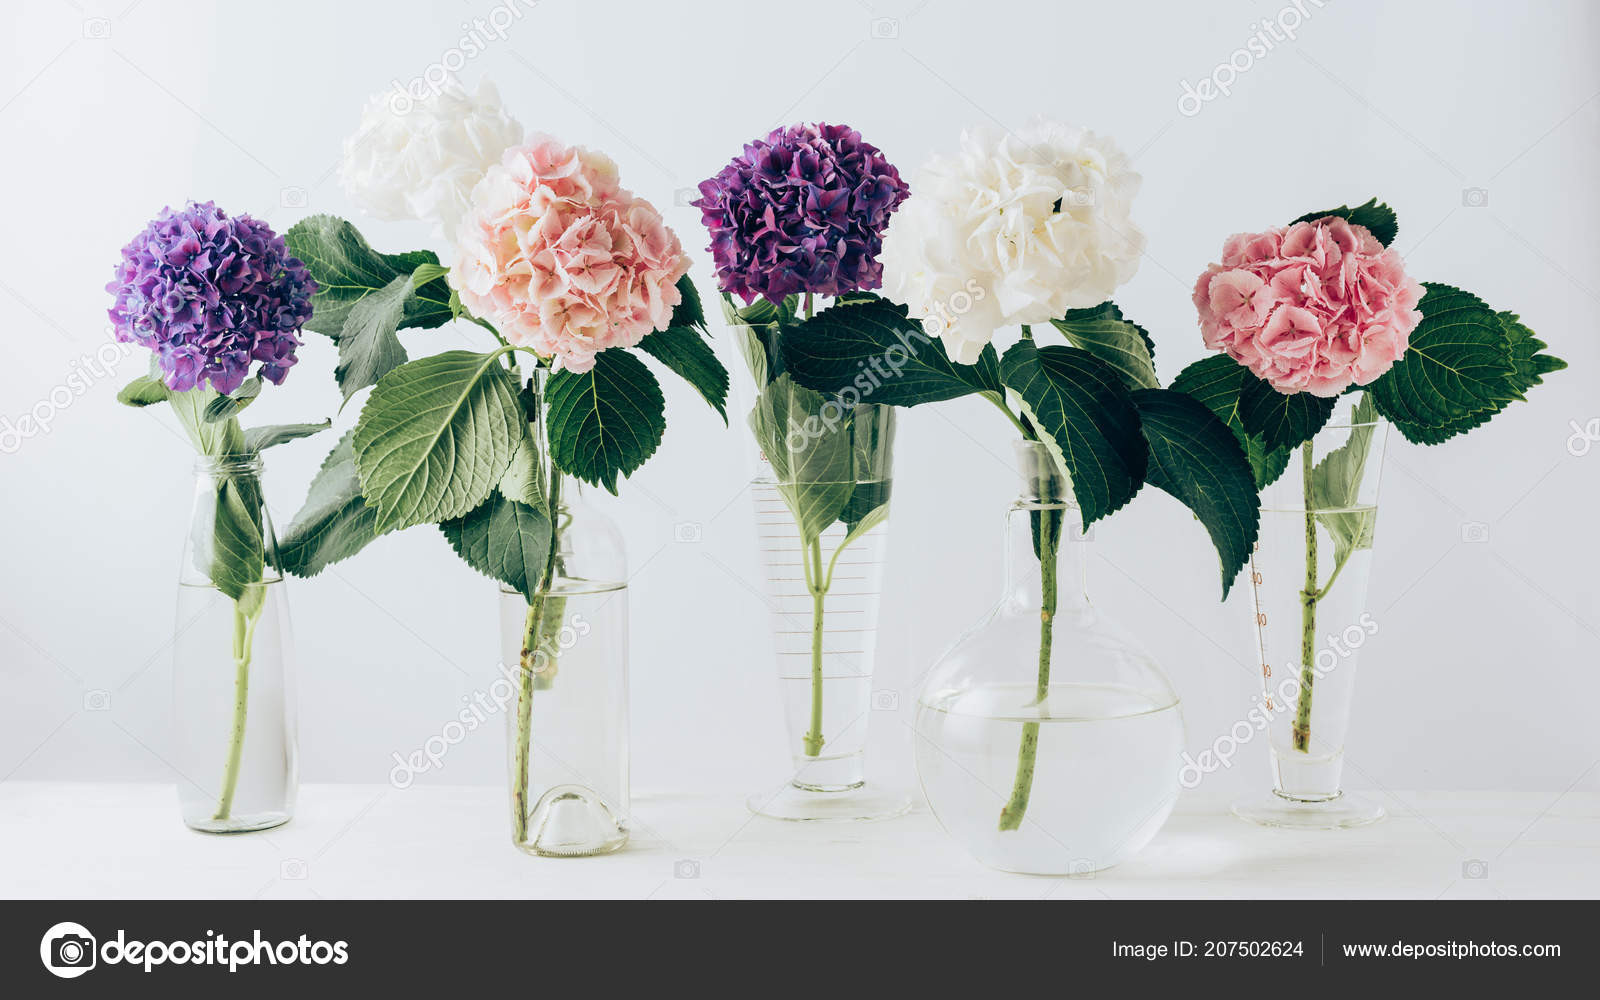 28 Perfect Glass Vase White Flowers 2024 free download glass vase white flowers of beautiful colorful blooming flowers hydrangea glass vases white pertaining to beautiful colorful blooming flowers of hydrangea in glass vases on white fotografie 